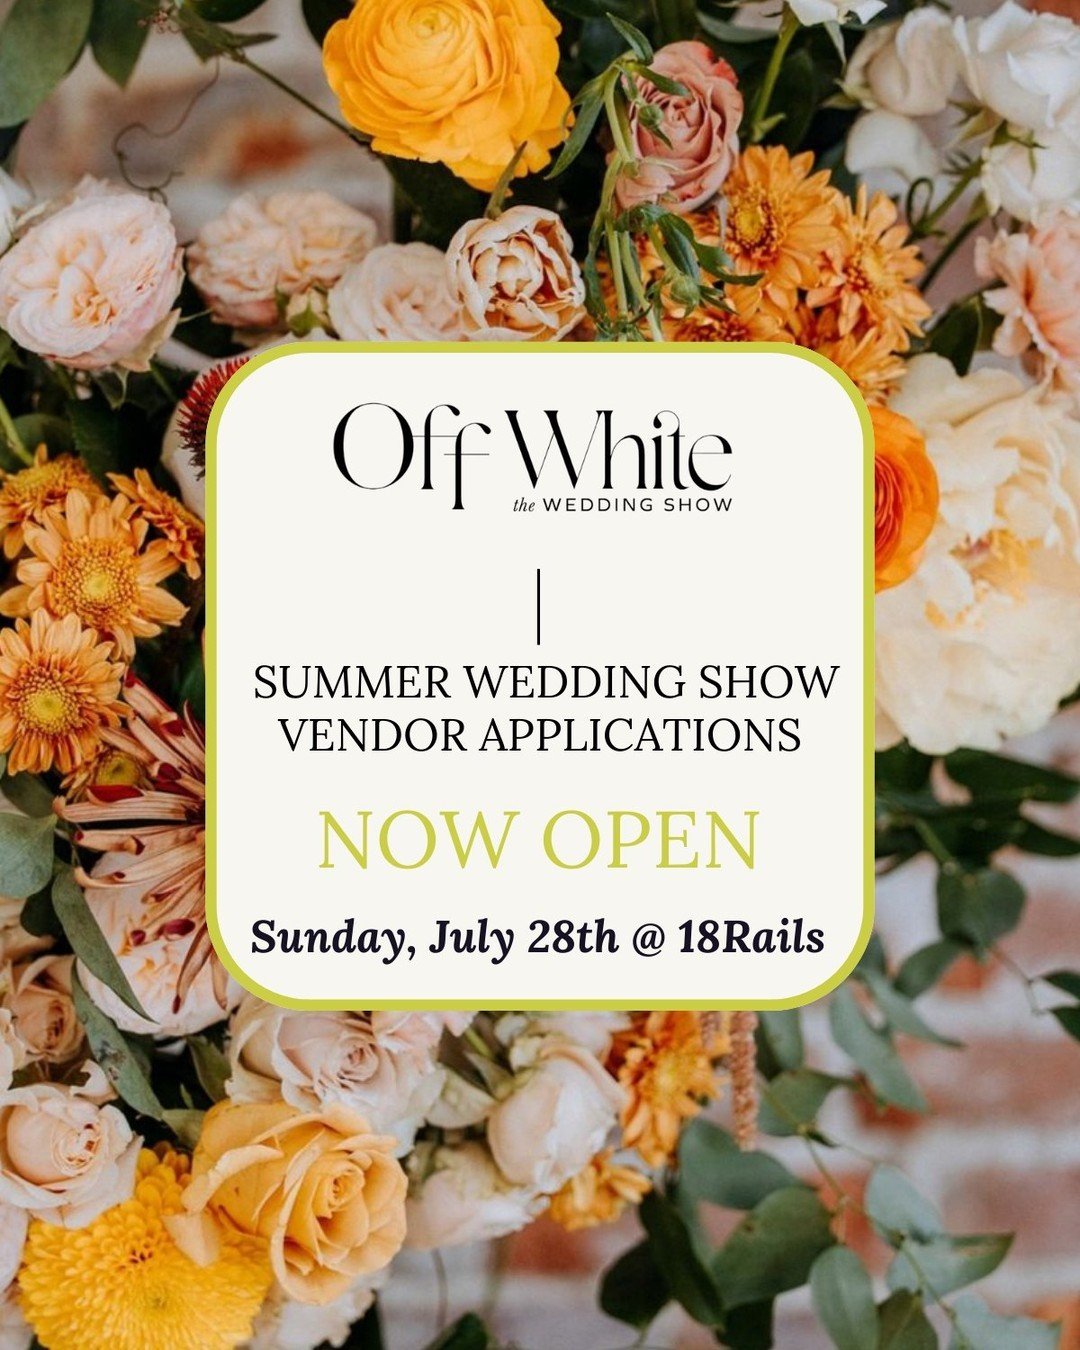 Calling all St. Louis wedding pros 📣⁠
⁠
Off White's bi-annual wedding show is your chance to connect with couples eagerly planning their big day along with other talented industry experts in a fun &amp; intimate setting. ⁠
⁠
Act fast because spots a